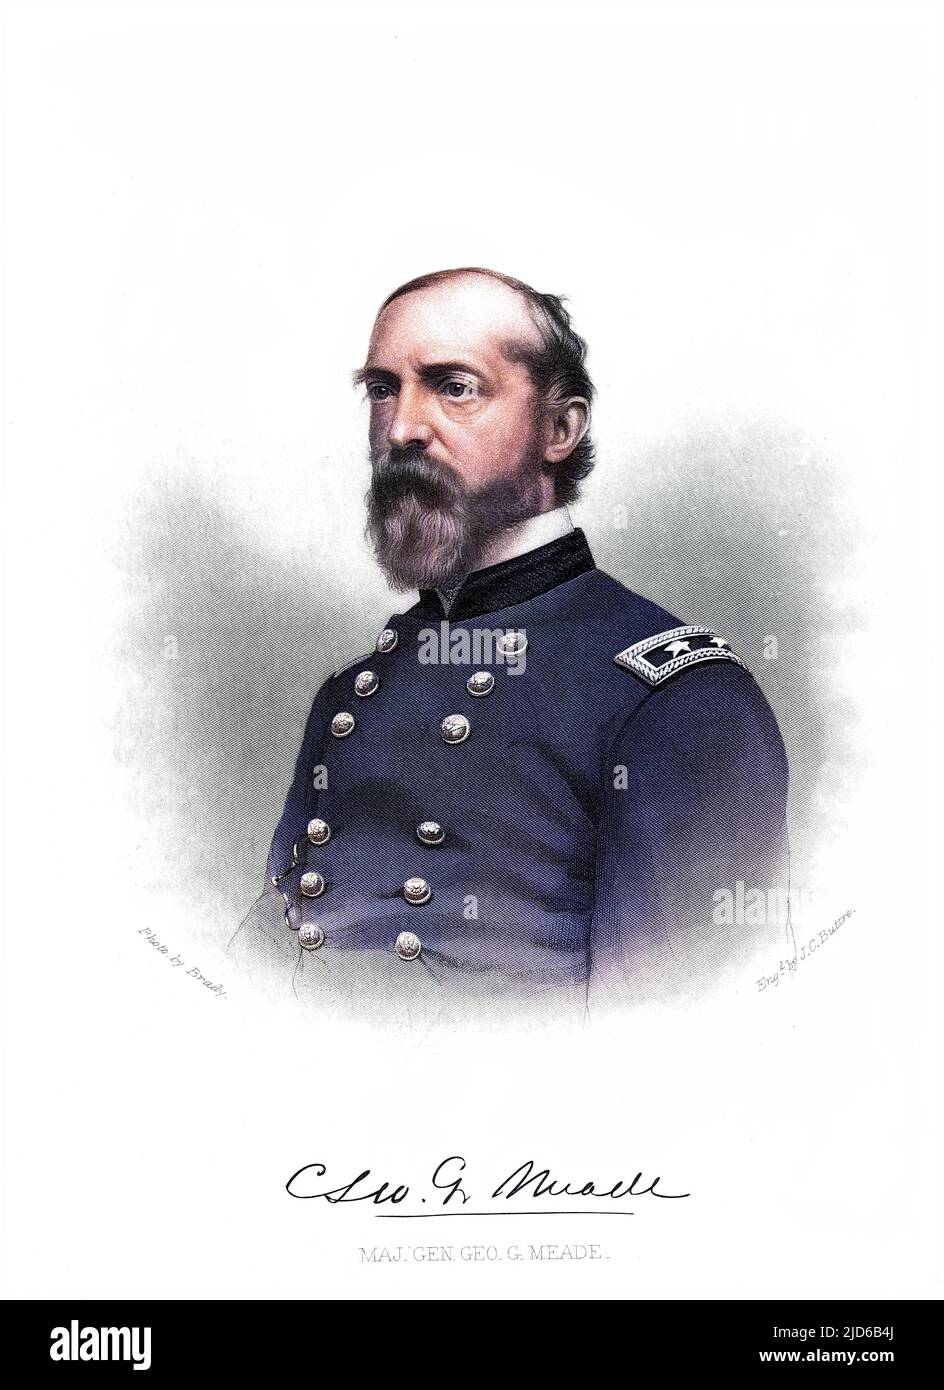 GEORGE GORDON MEADE (1815 - 1872), U.S. army general, commanded Army of the Potomac, defeated Lee at Gettysburg but criticised for not following up sufficiently aggressively. Colourised version of : 10164752 Stock Photo